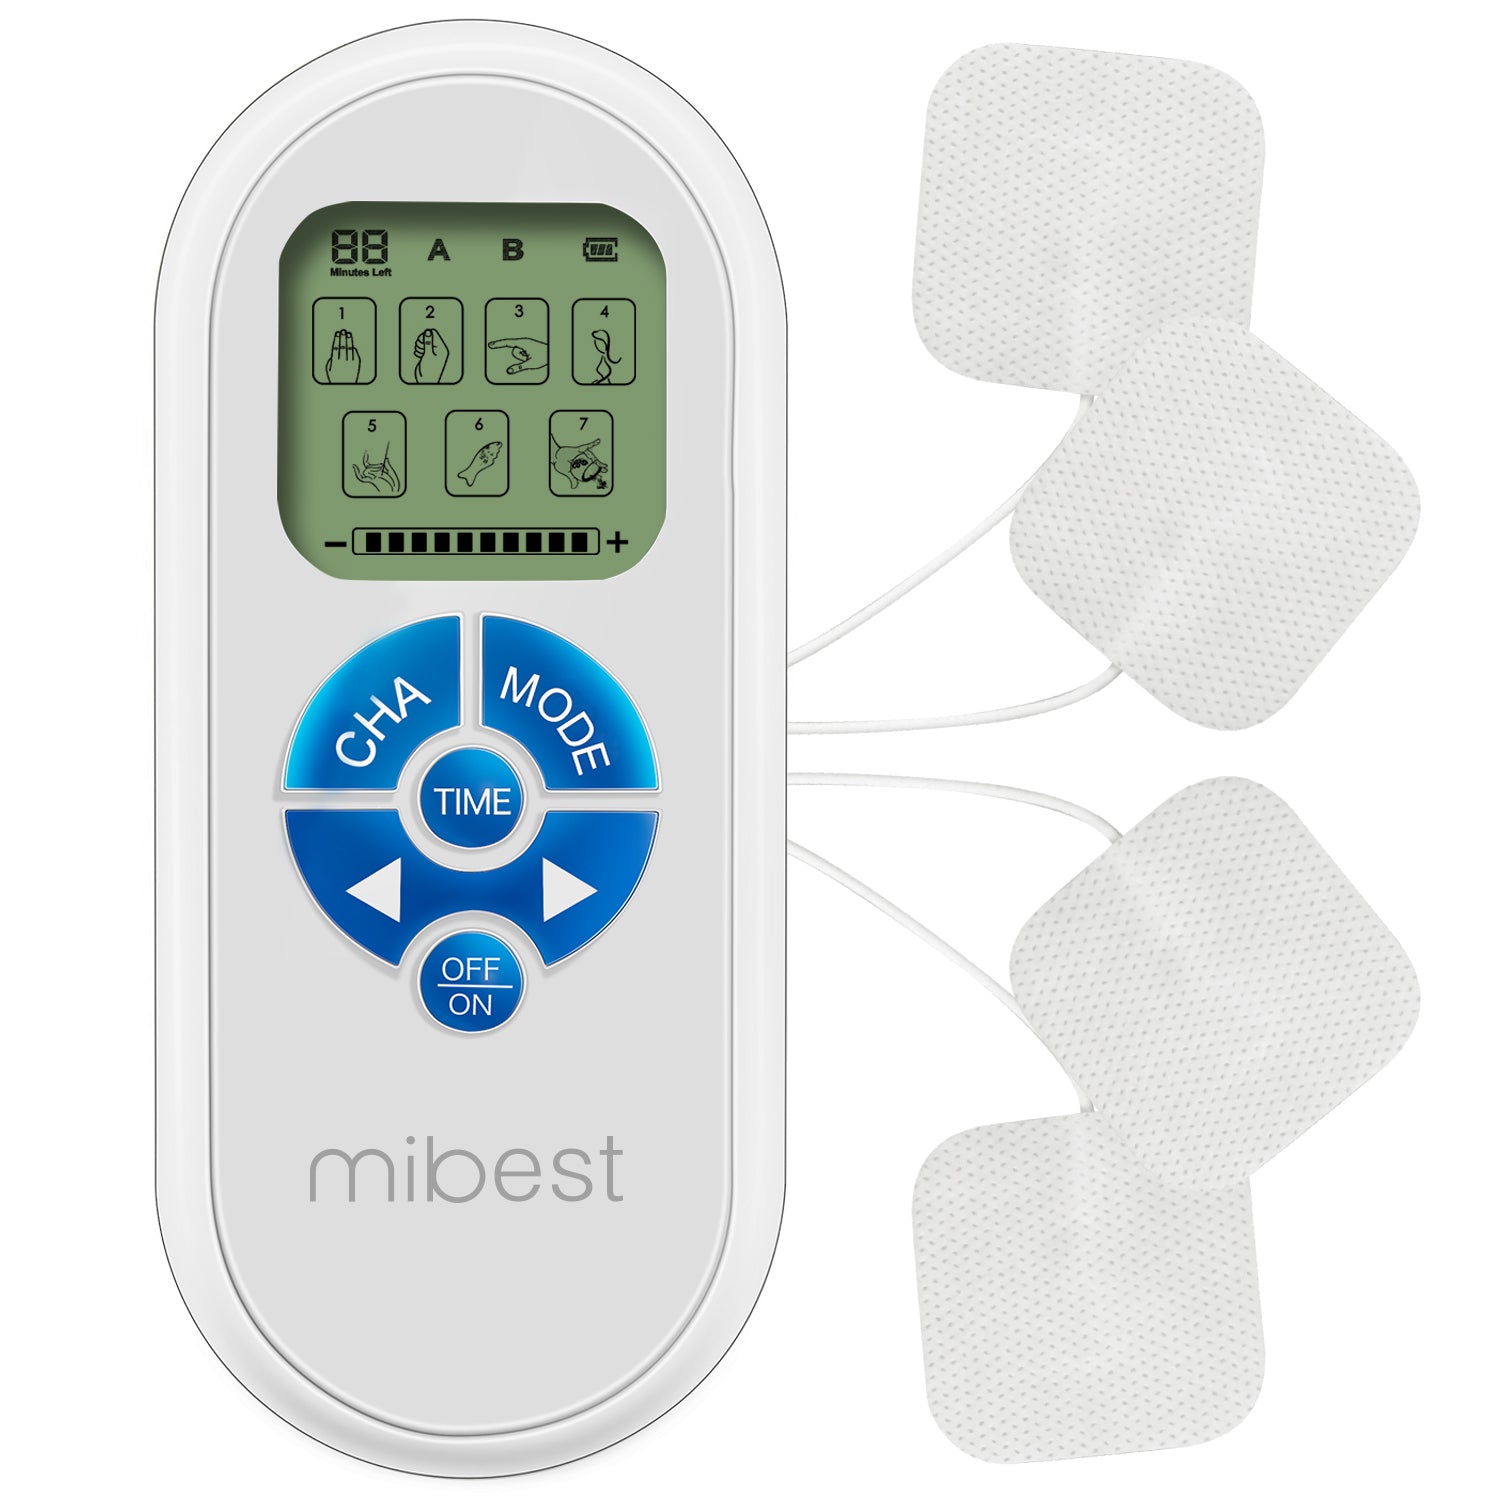 easy@Home TENS Electronic Pulse Stimulator Muscle Massager Unit